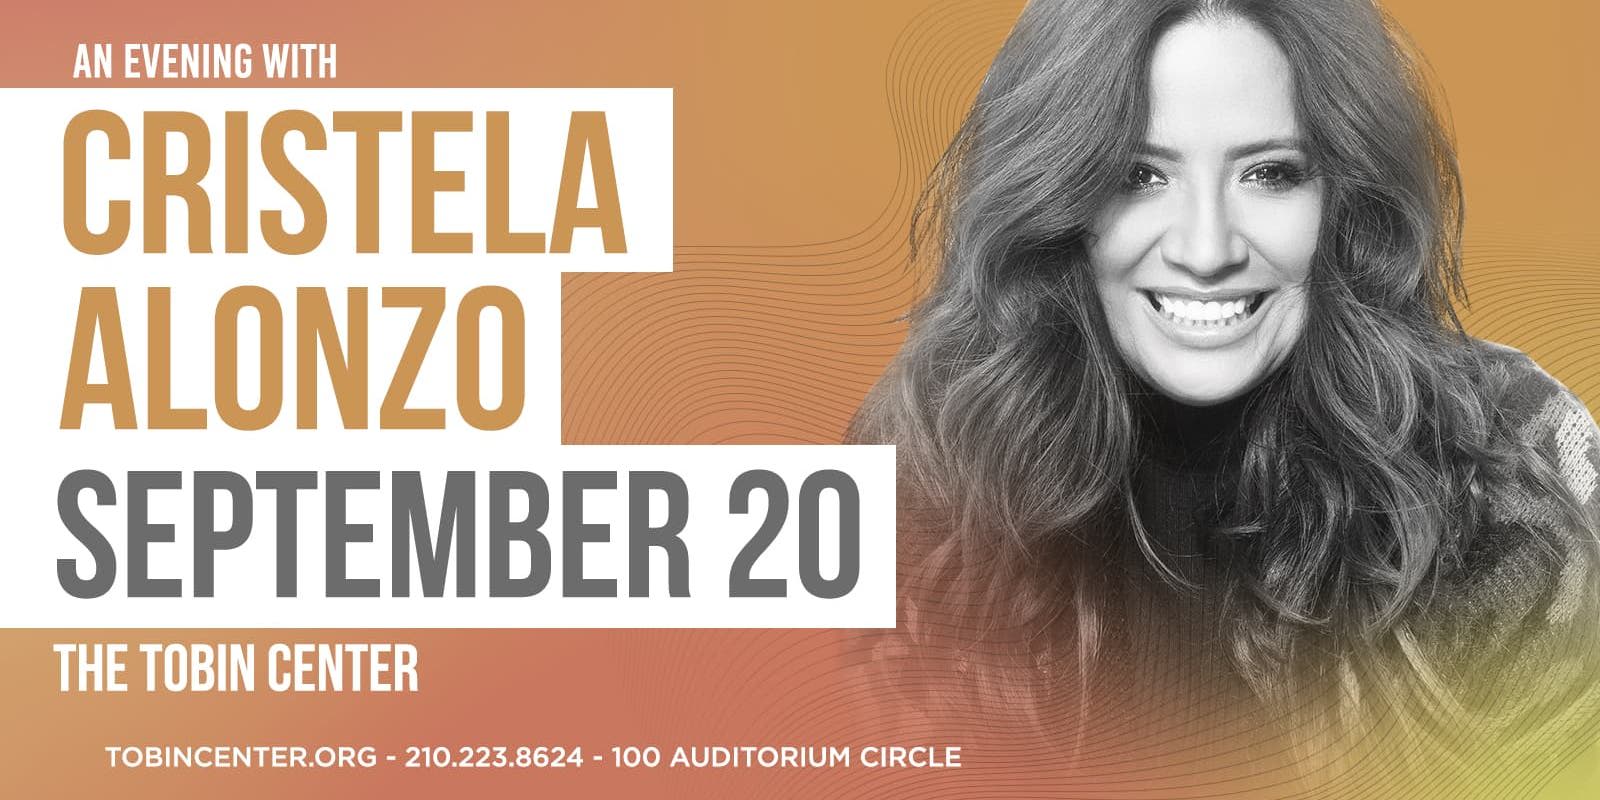 An Evening with Cristela Alonzo promotional image